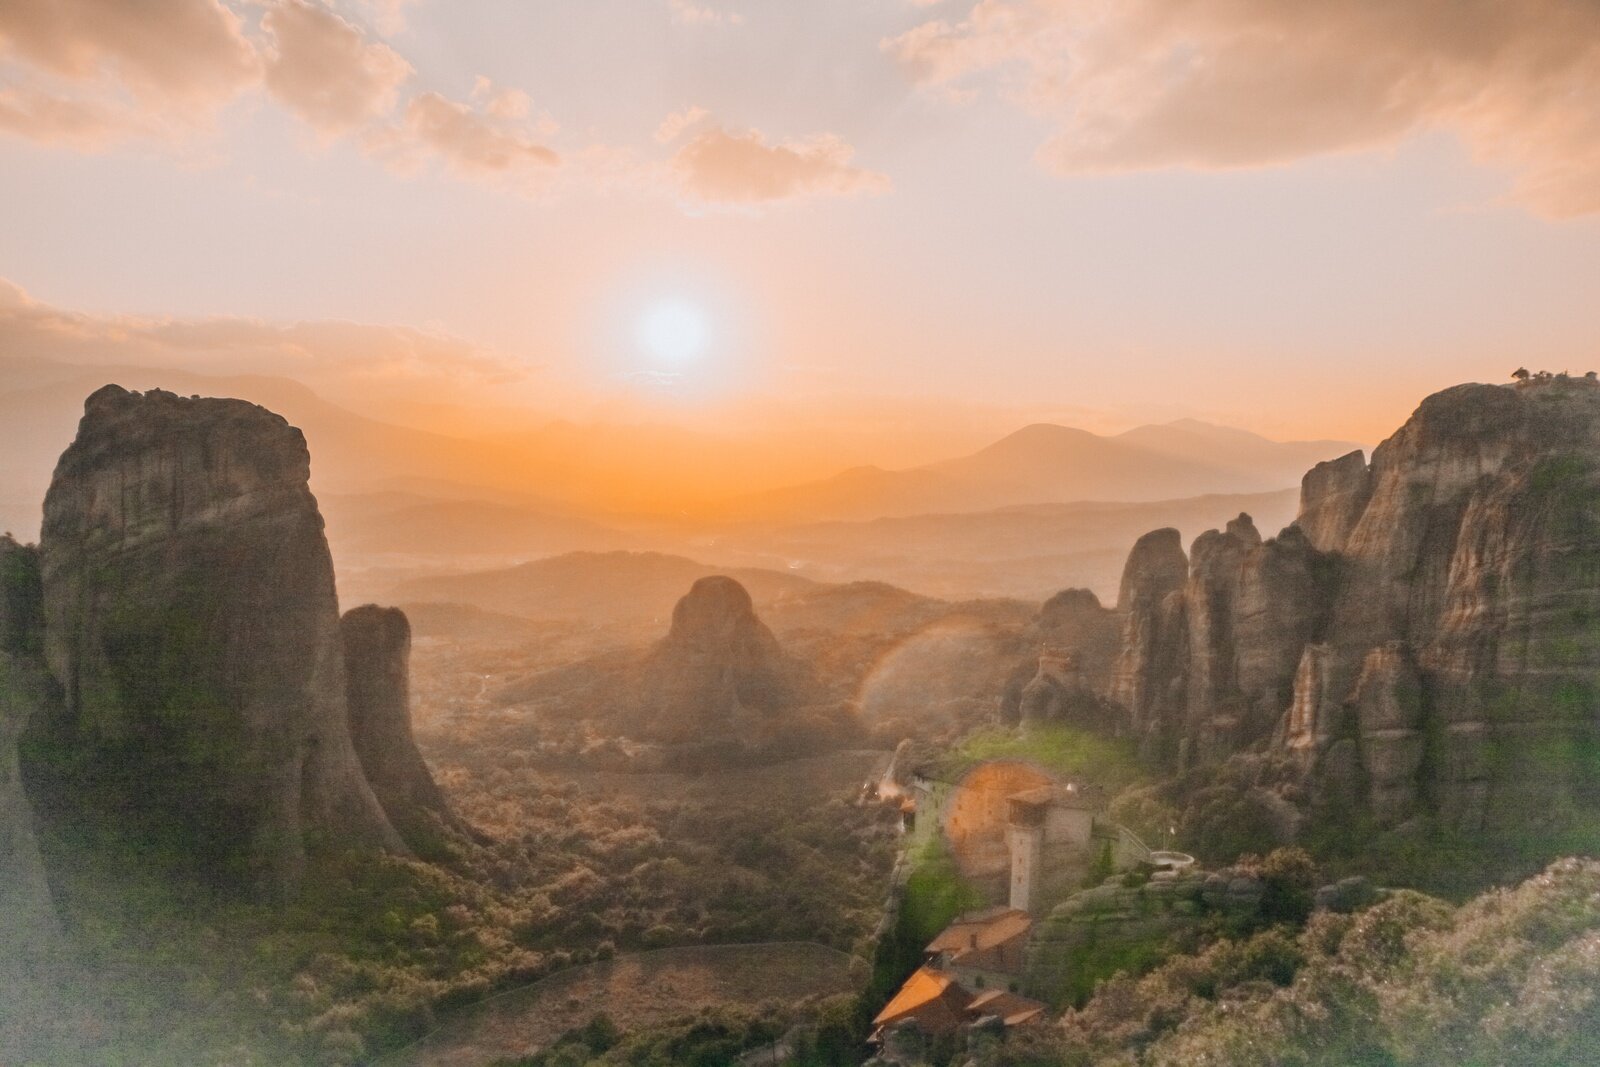 Sunset viewpoint in Meteora, Greece